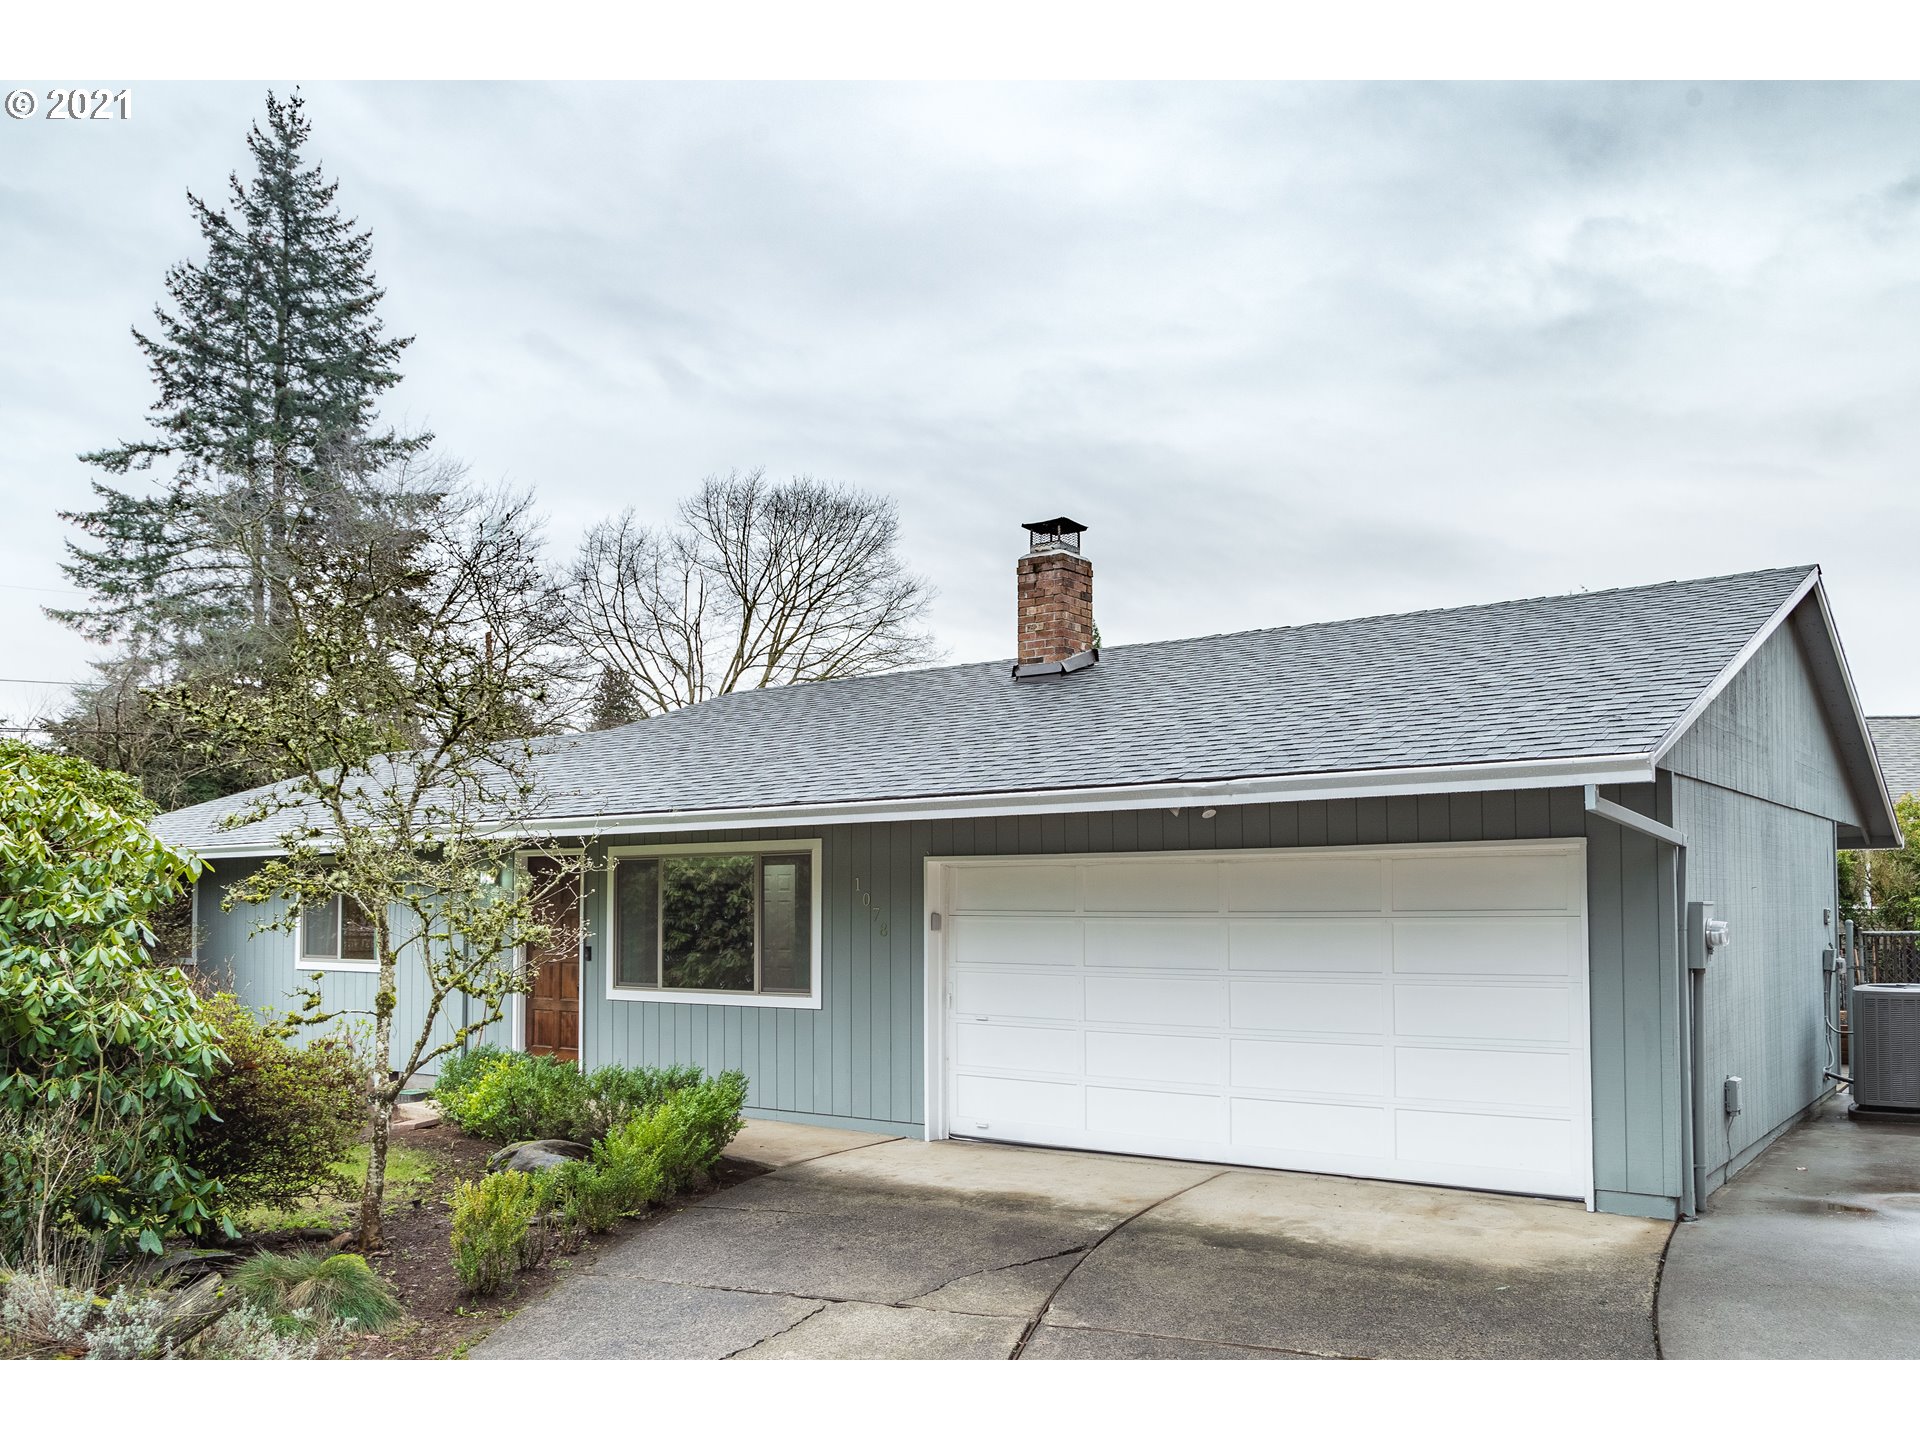 1078 SE 174TH AVE (1 of 32)